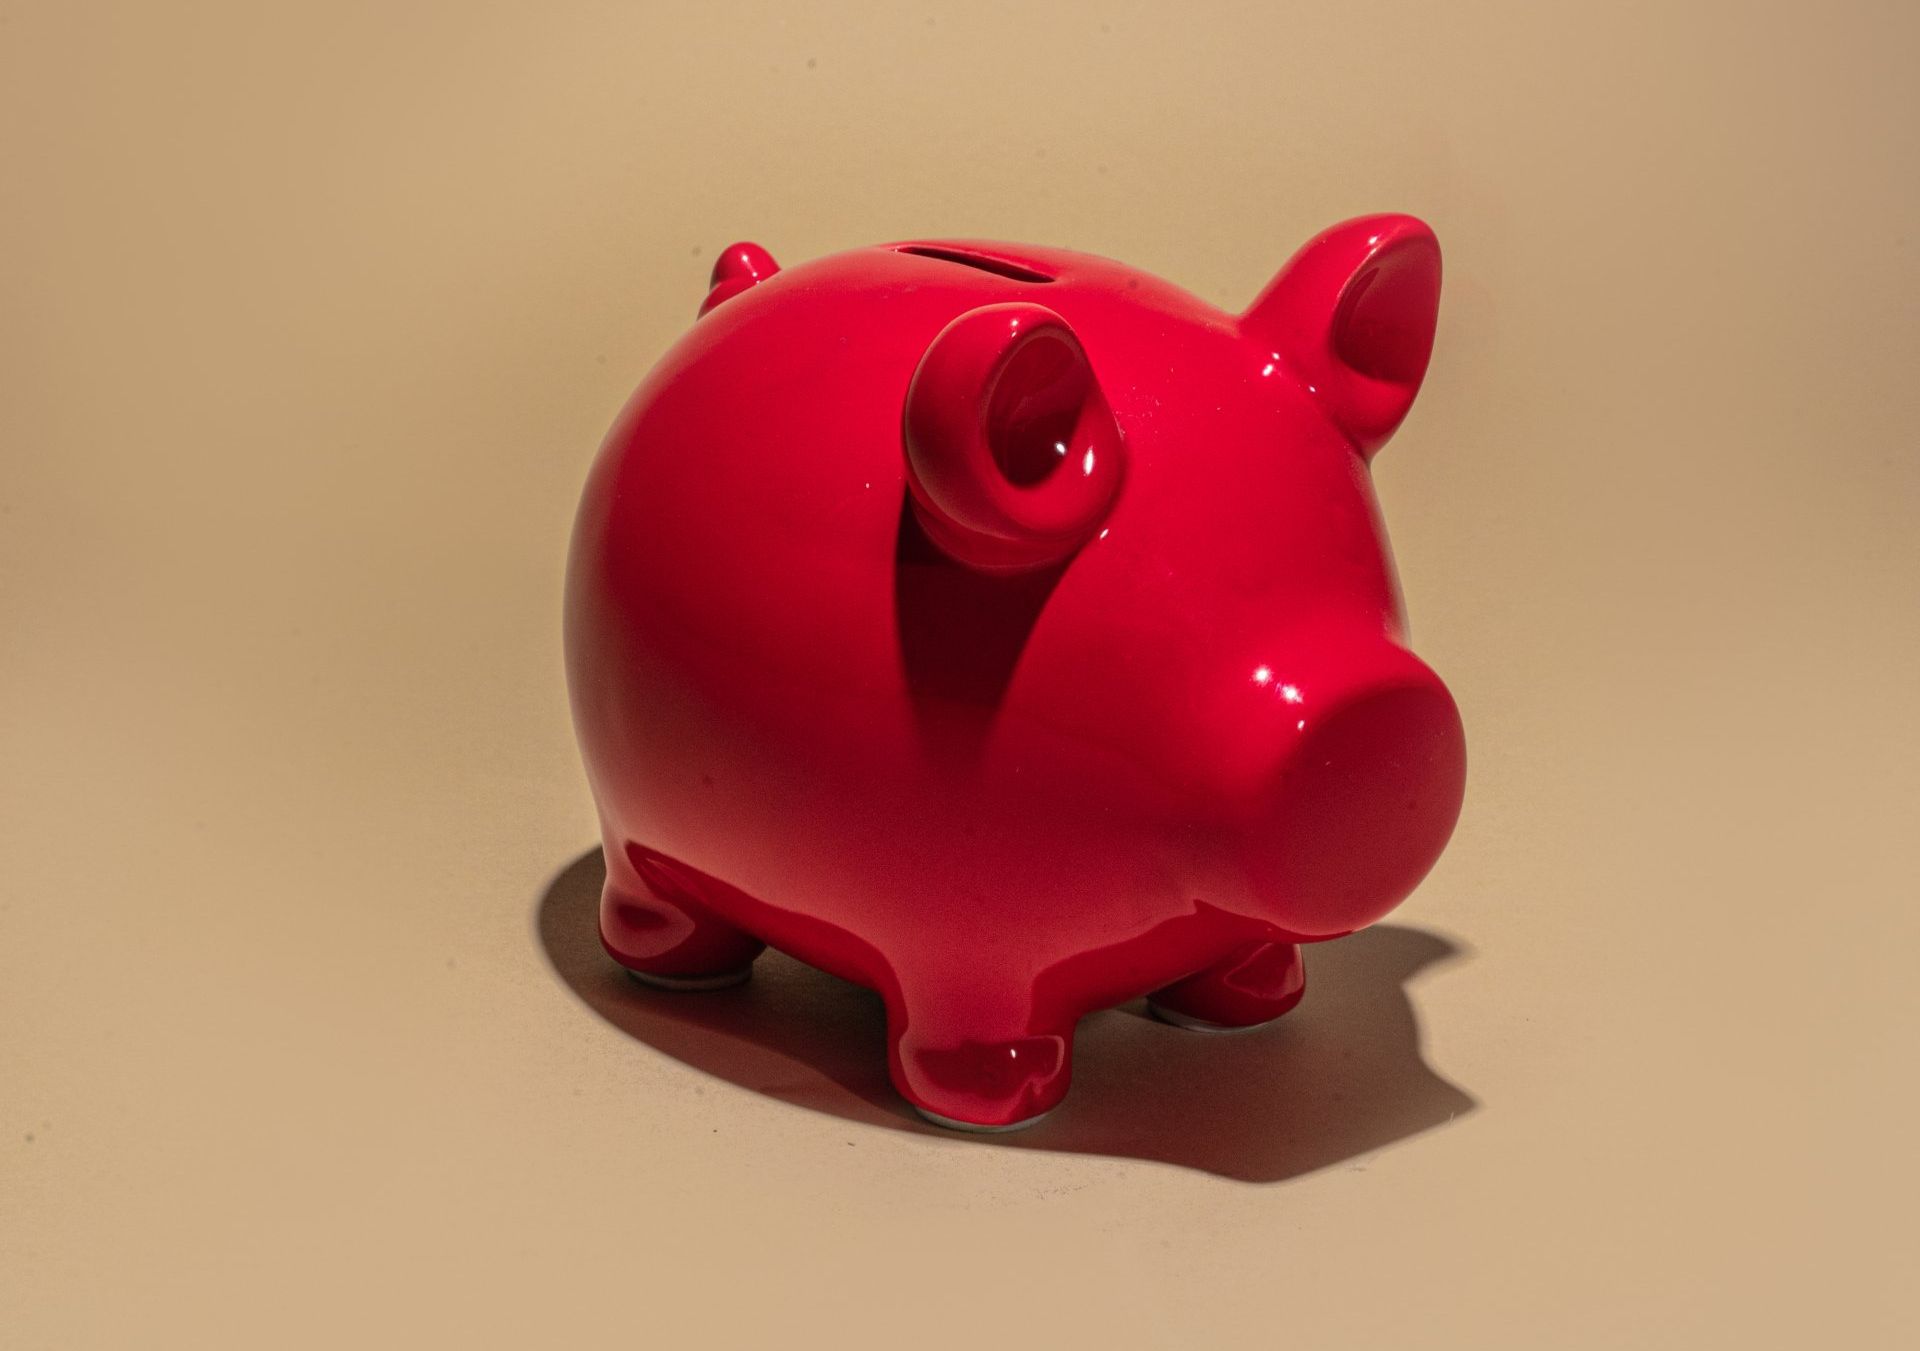 a red piggy bank is sitting on a beige surface .